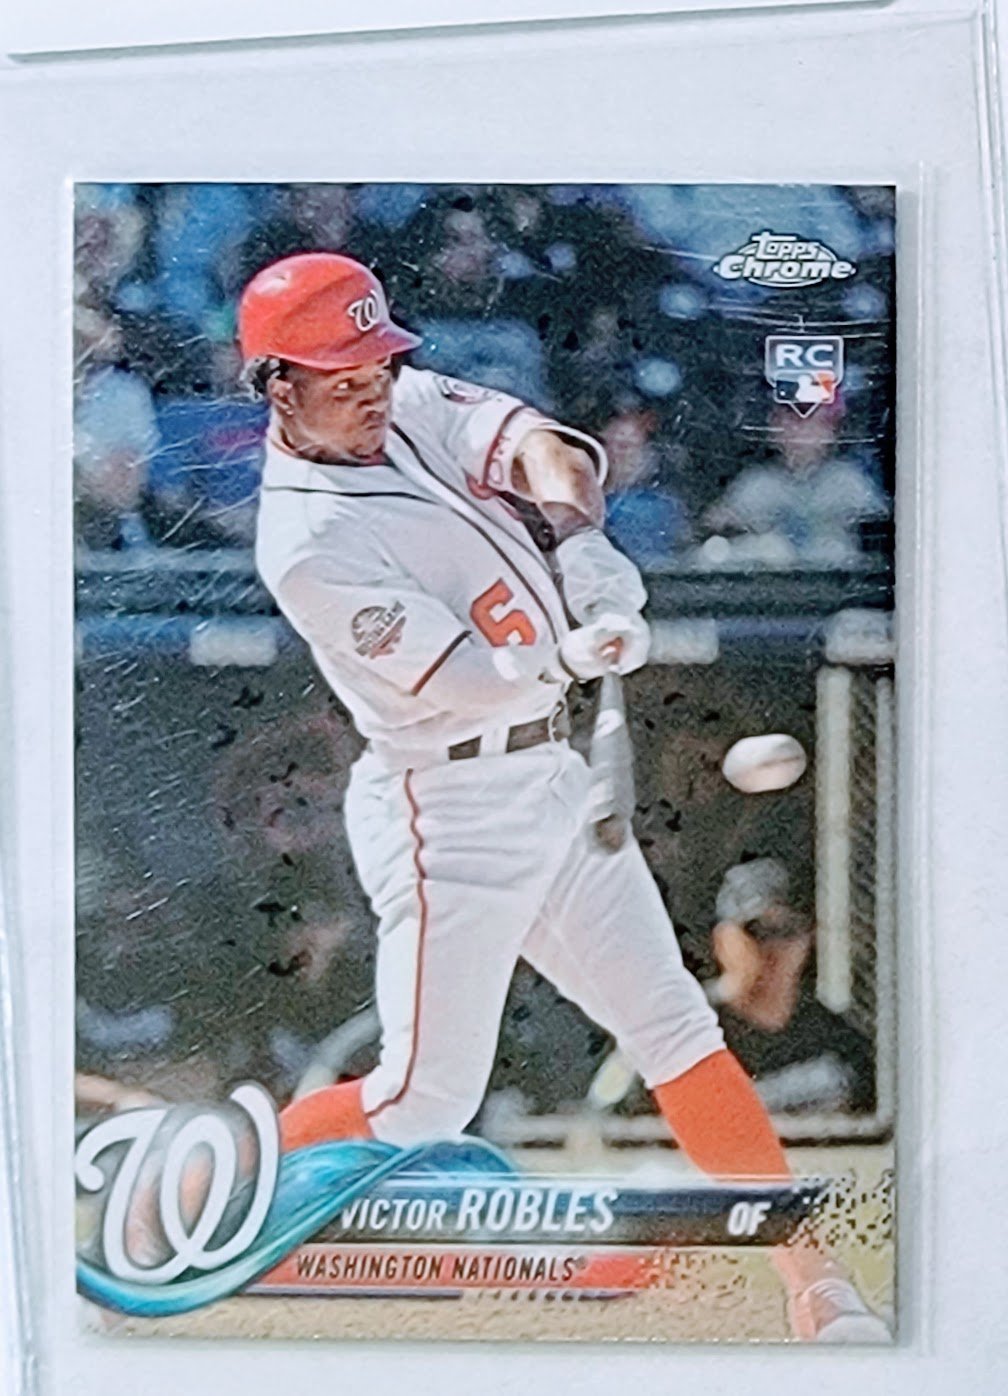 2018 Topps Chrome Update Victor Robles Rookie Baseball Trading Card TPTV simple Xclusive Collectibles   